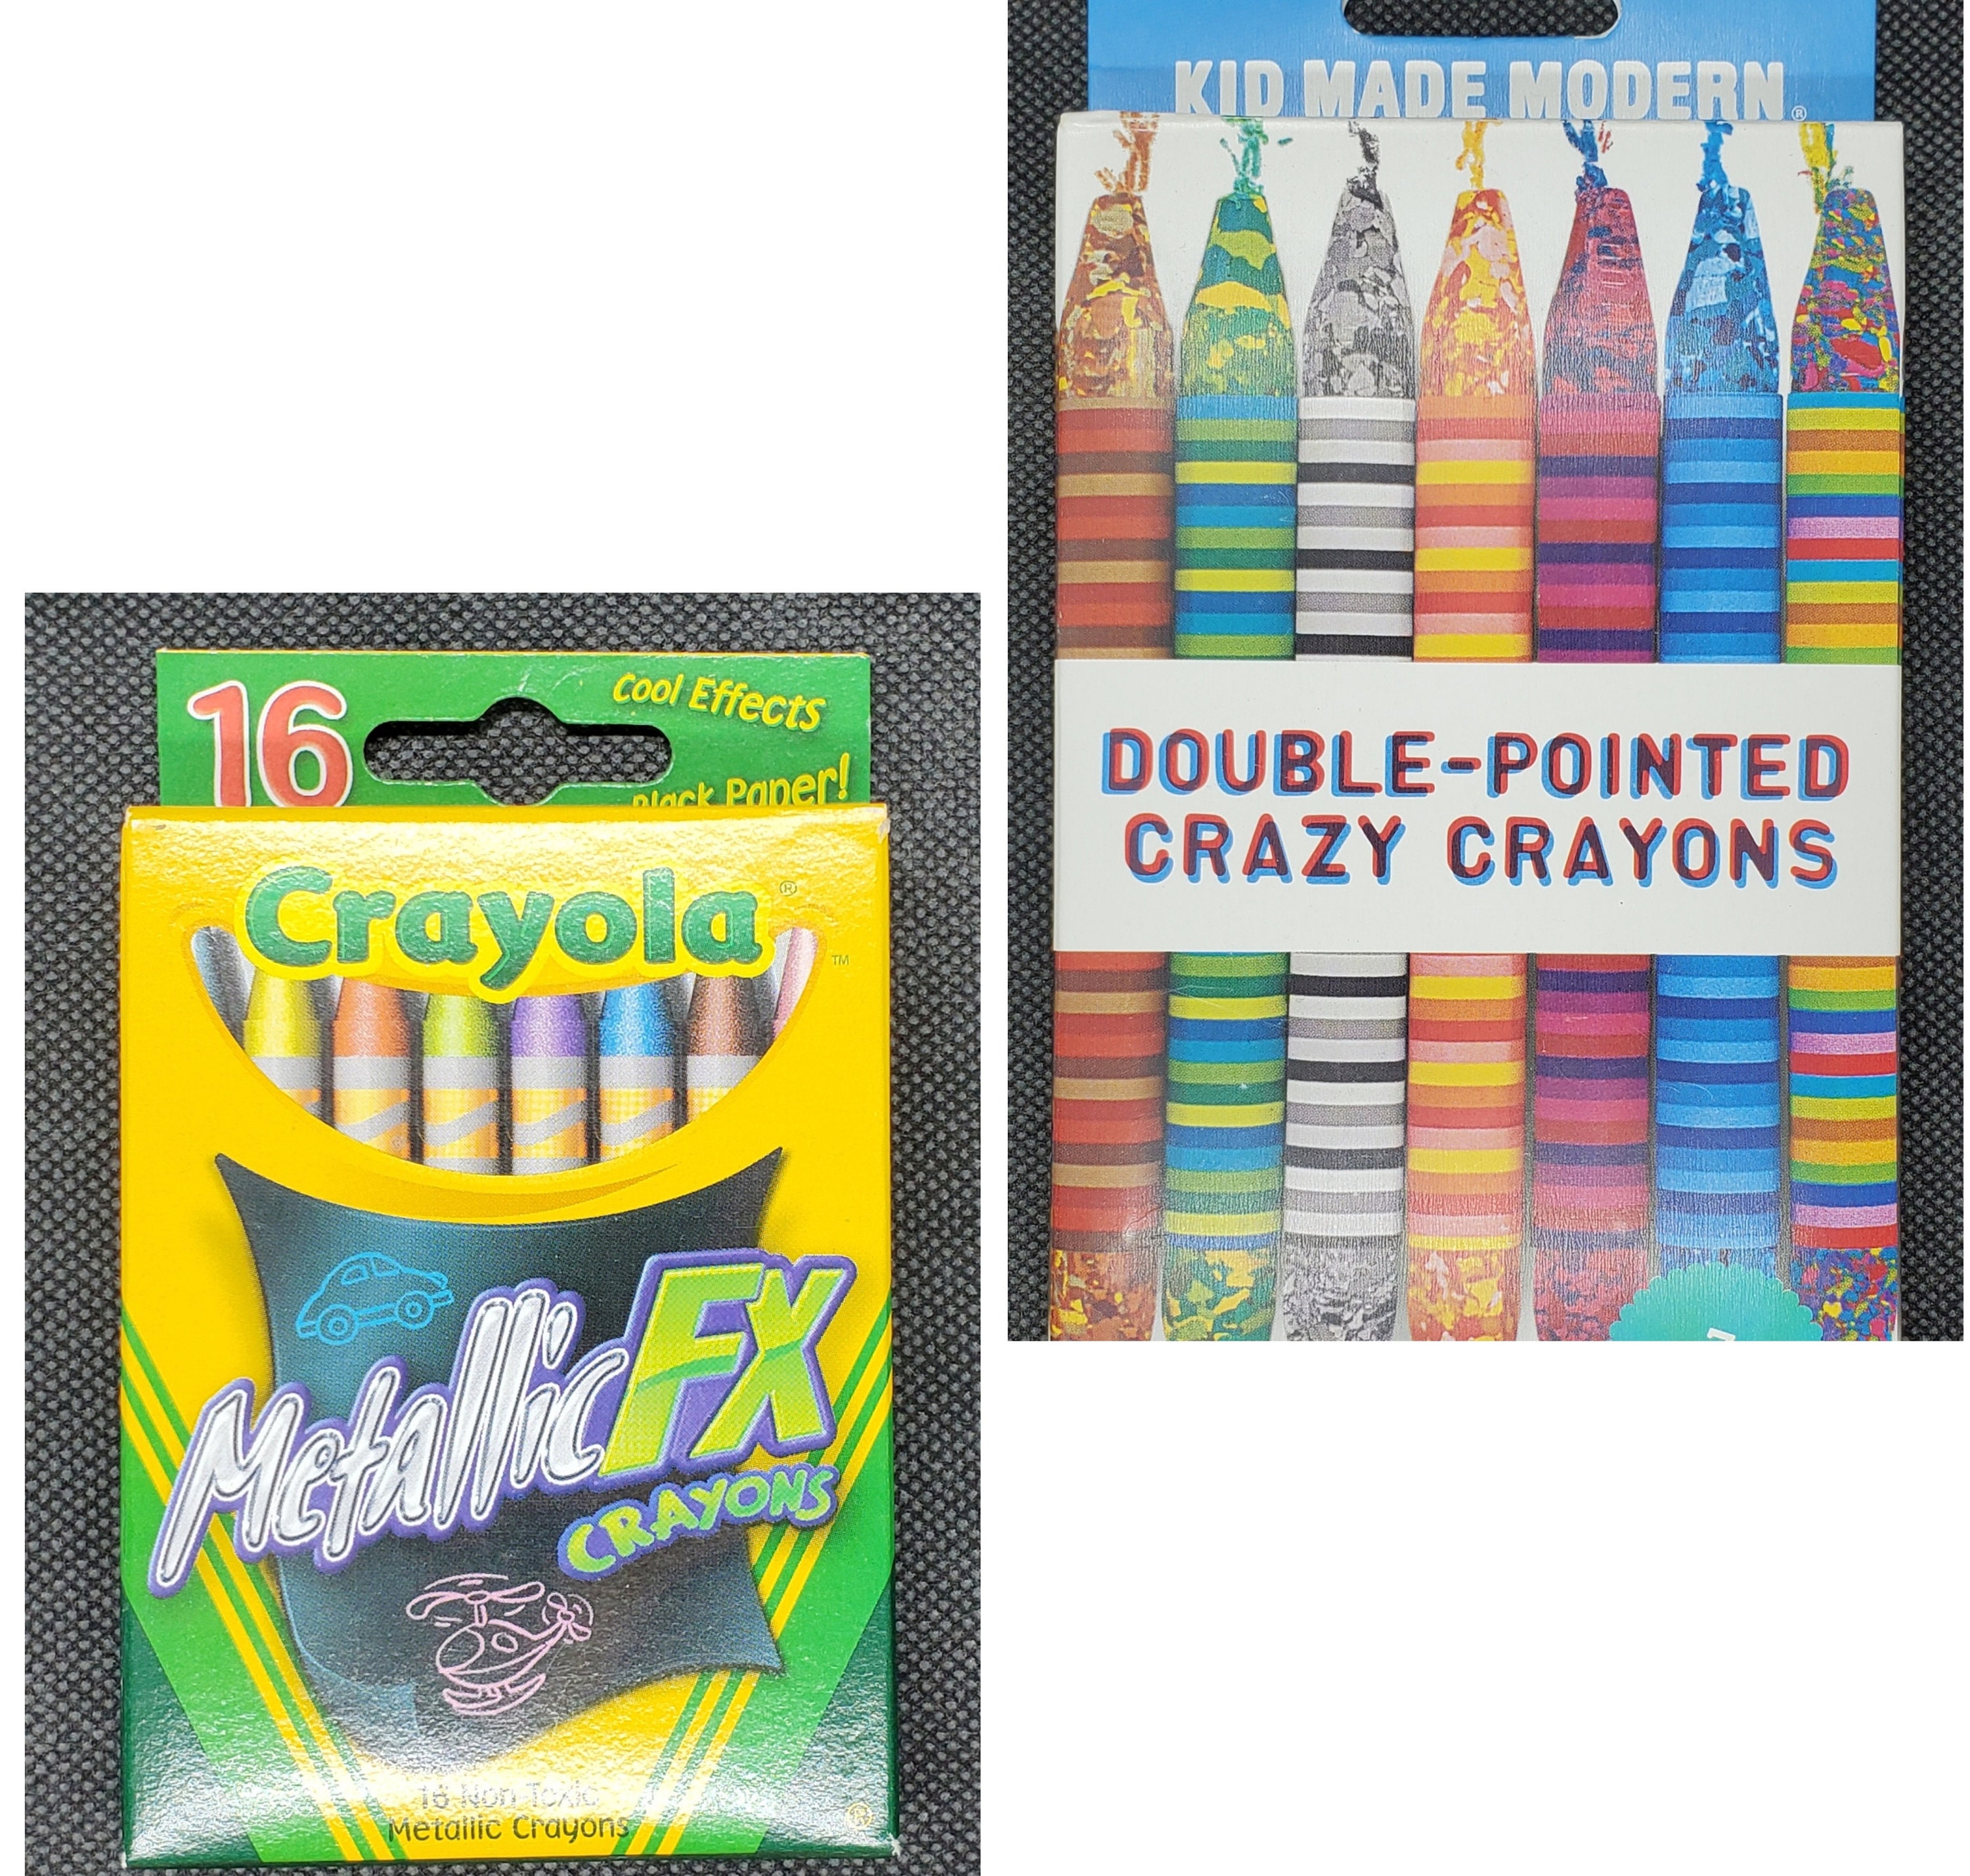 Specialty Crayons: kids Made Modern Double-pointed Crazy Crayons